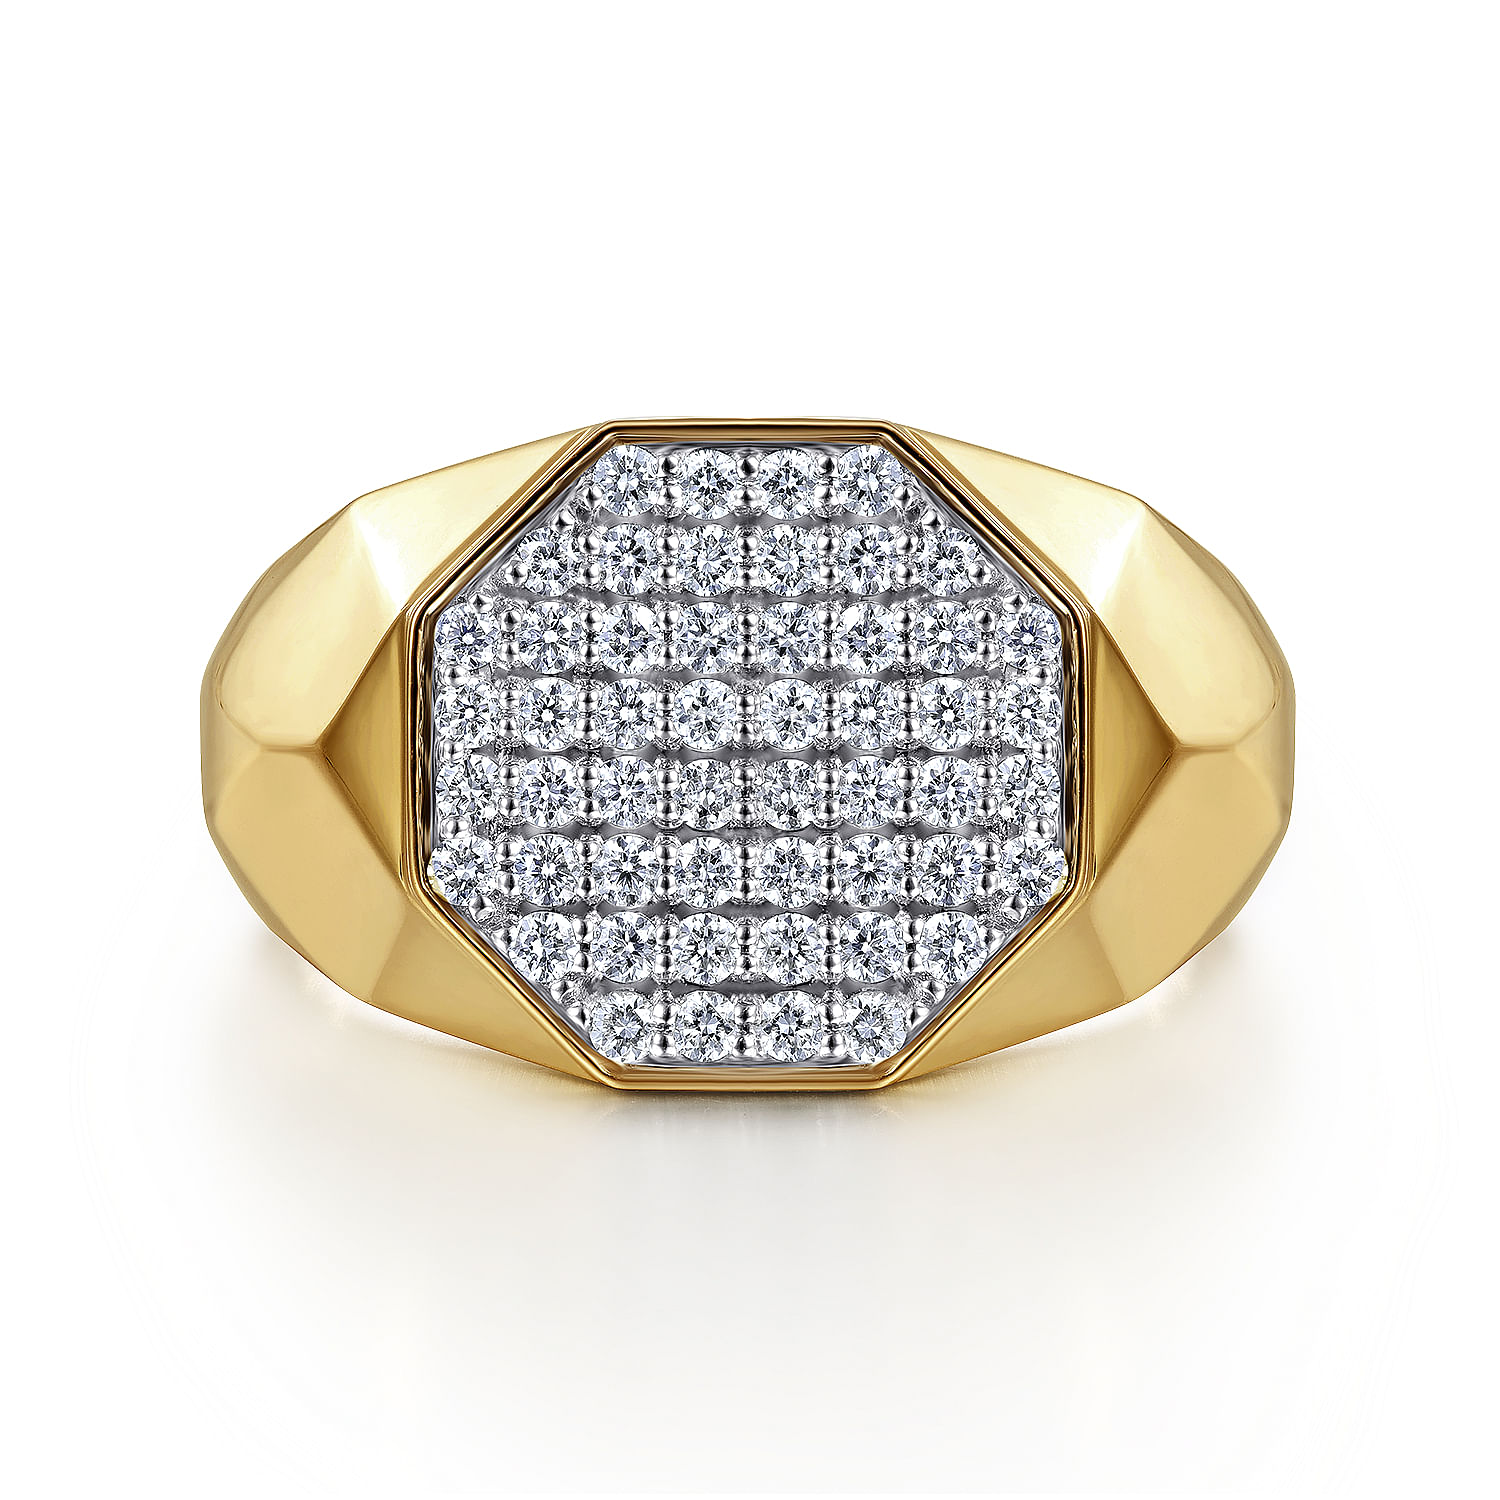 Wide 14K Yellow Gold Faceted Signet Ring with Pavé Diamonds in High Polished Finish